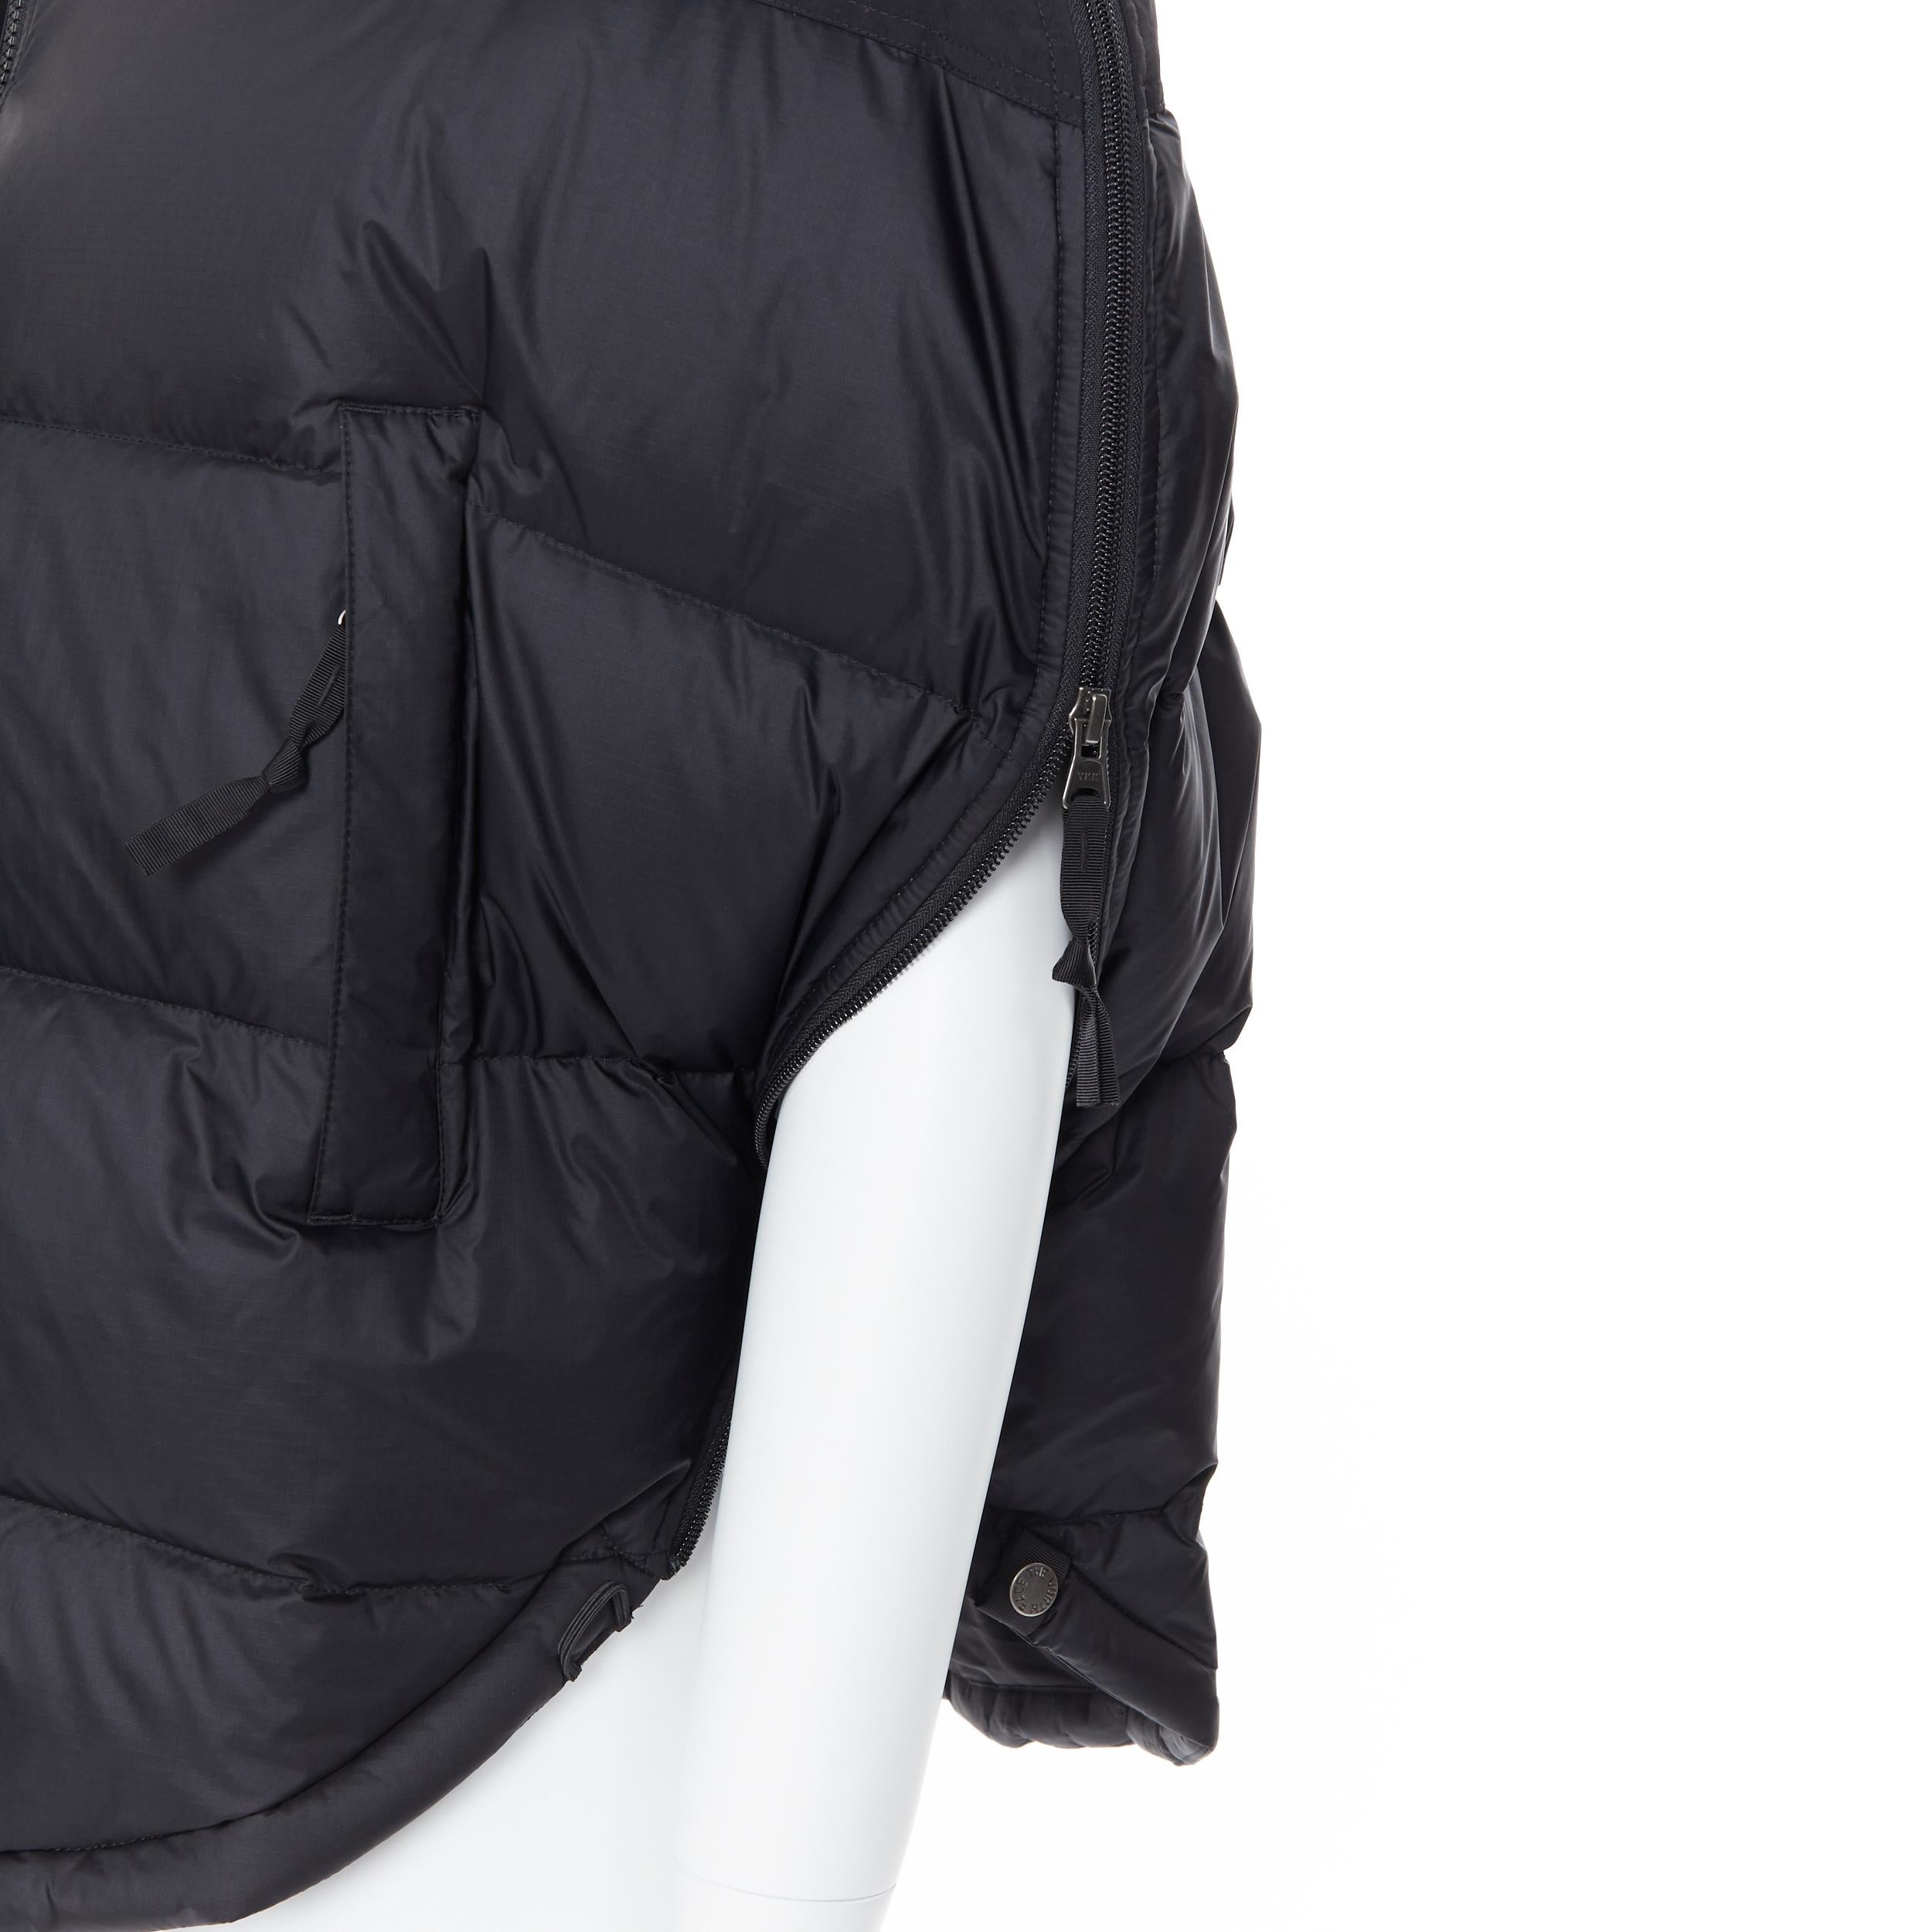 new MAISON MARGIELA MM6 NORTH FACE AW20 Nuptse circle down padded jacket S / M
Brand: Maison Margiela
Designer: The North Face
Collection: AW2020
Model Name / Style: Nupse
Material: Other; goose down
Color: Black
Pattern: Solid
Closure: Zip
Extra